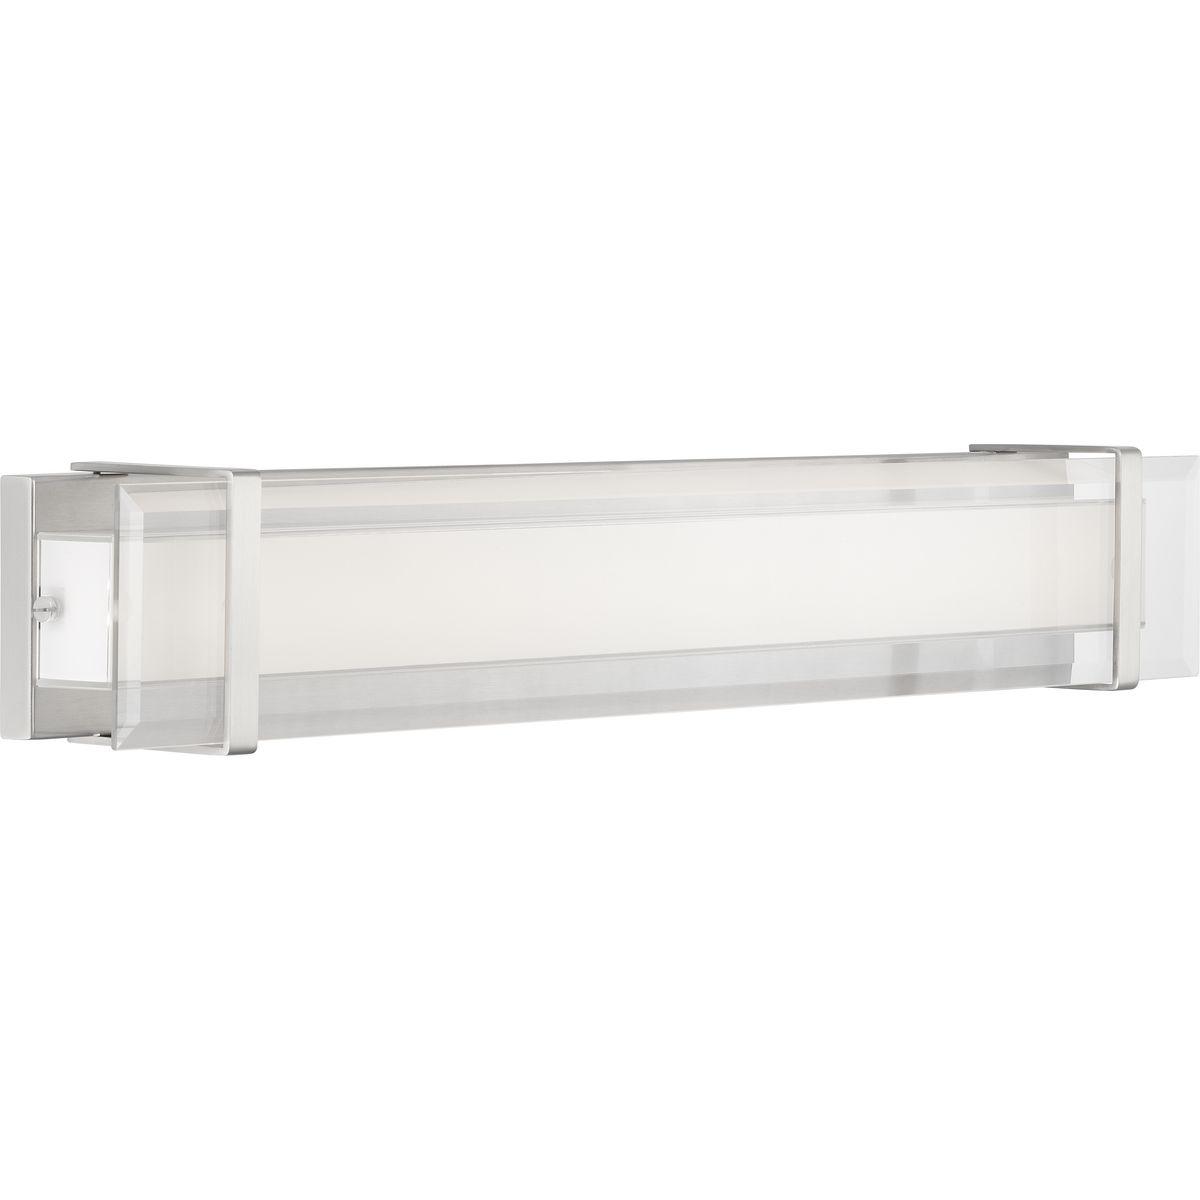 Hubbell P300153-009-30 The Miter LED 34in linear bath bar highlights a beautiful layered effect to enhance a variety of interior areas. Each clear beveled glass panel is hand cut and positioned together, creating visual interest that extend to the corners. To complete the form,